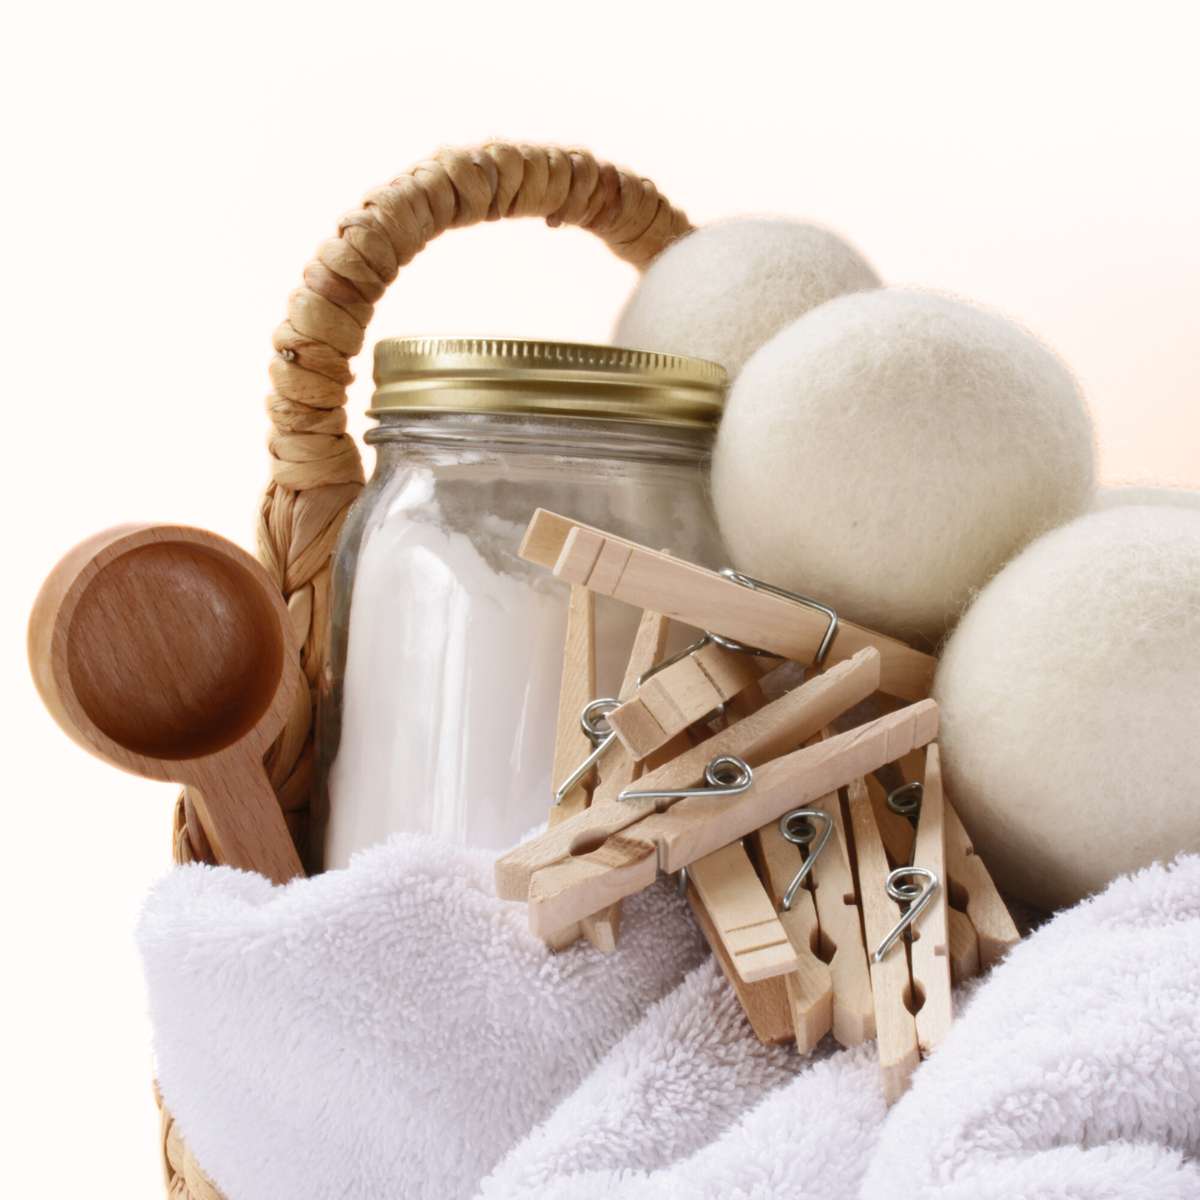 Homemade Non-Toxic Laundry Detergent with Essential Oils